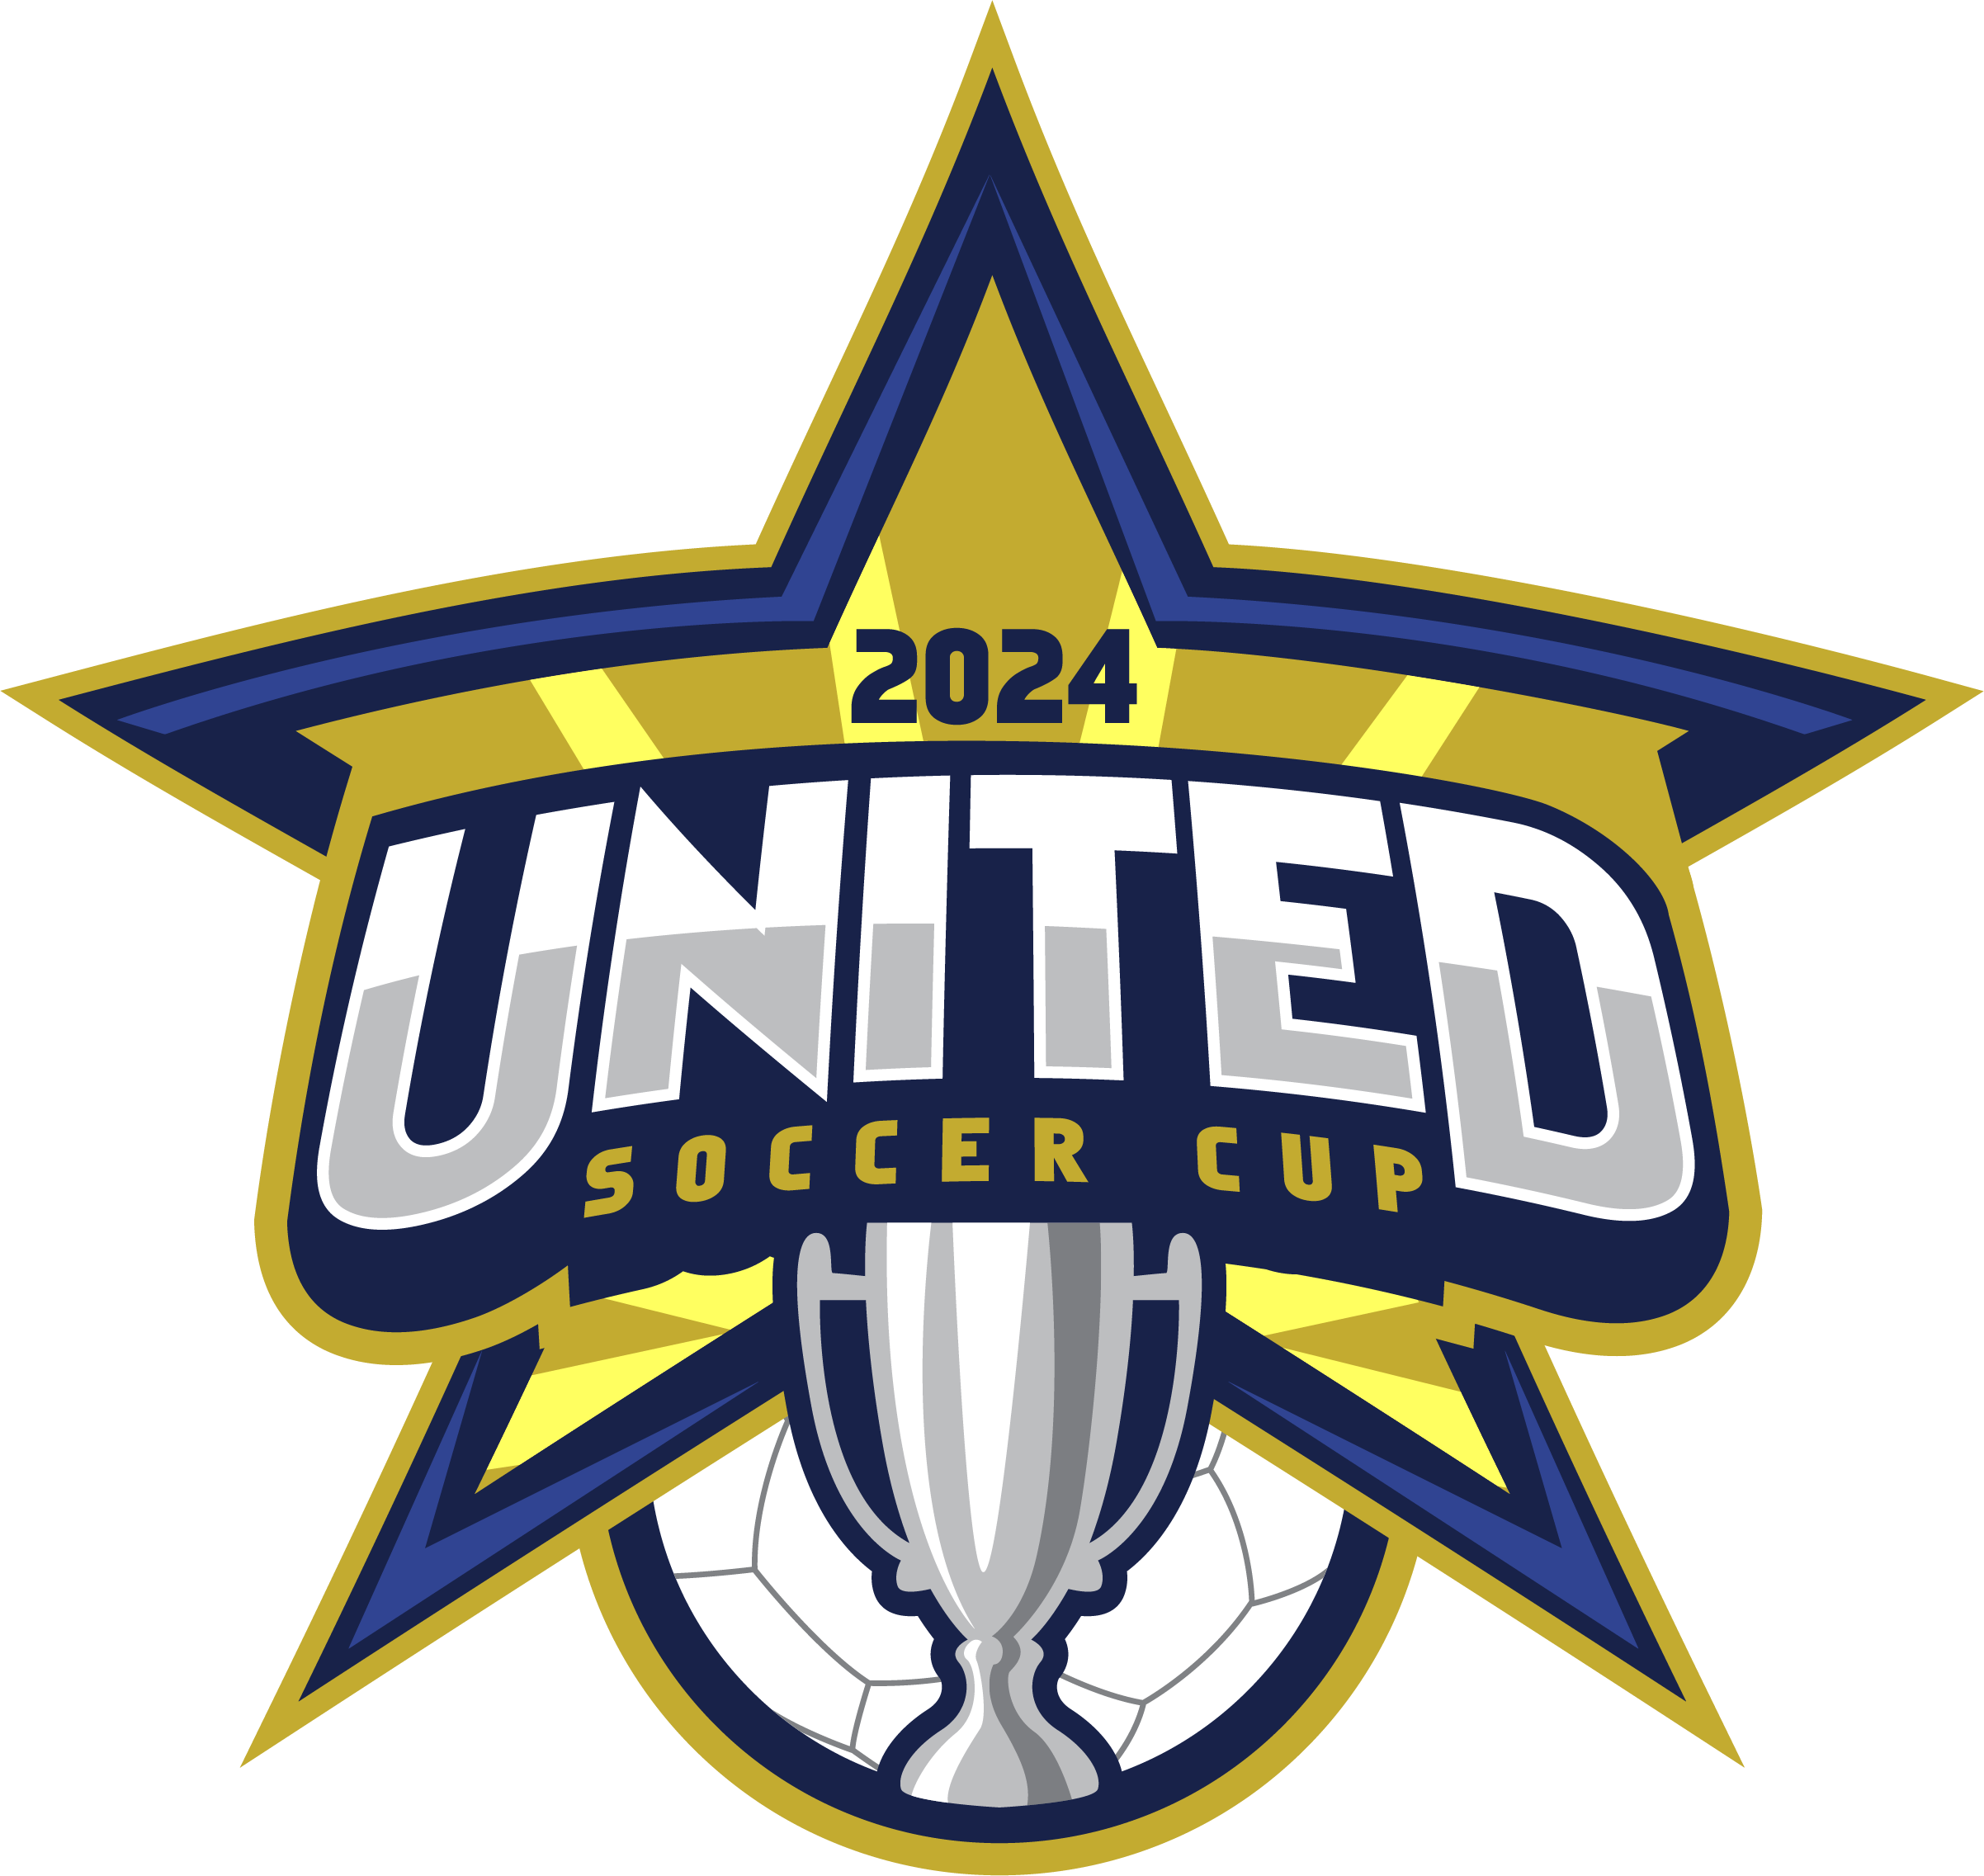 2024 United Soccer Cup